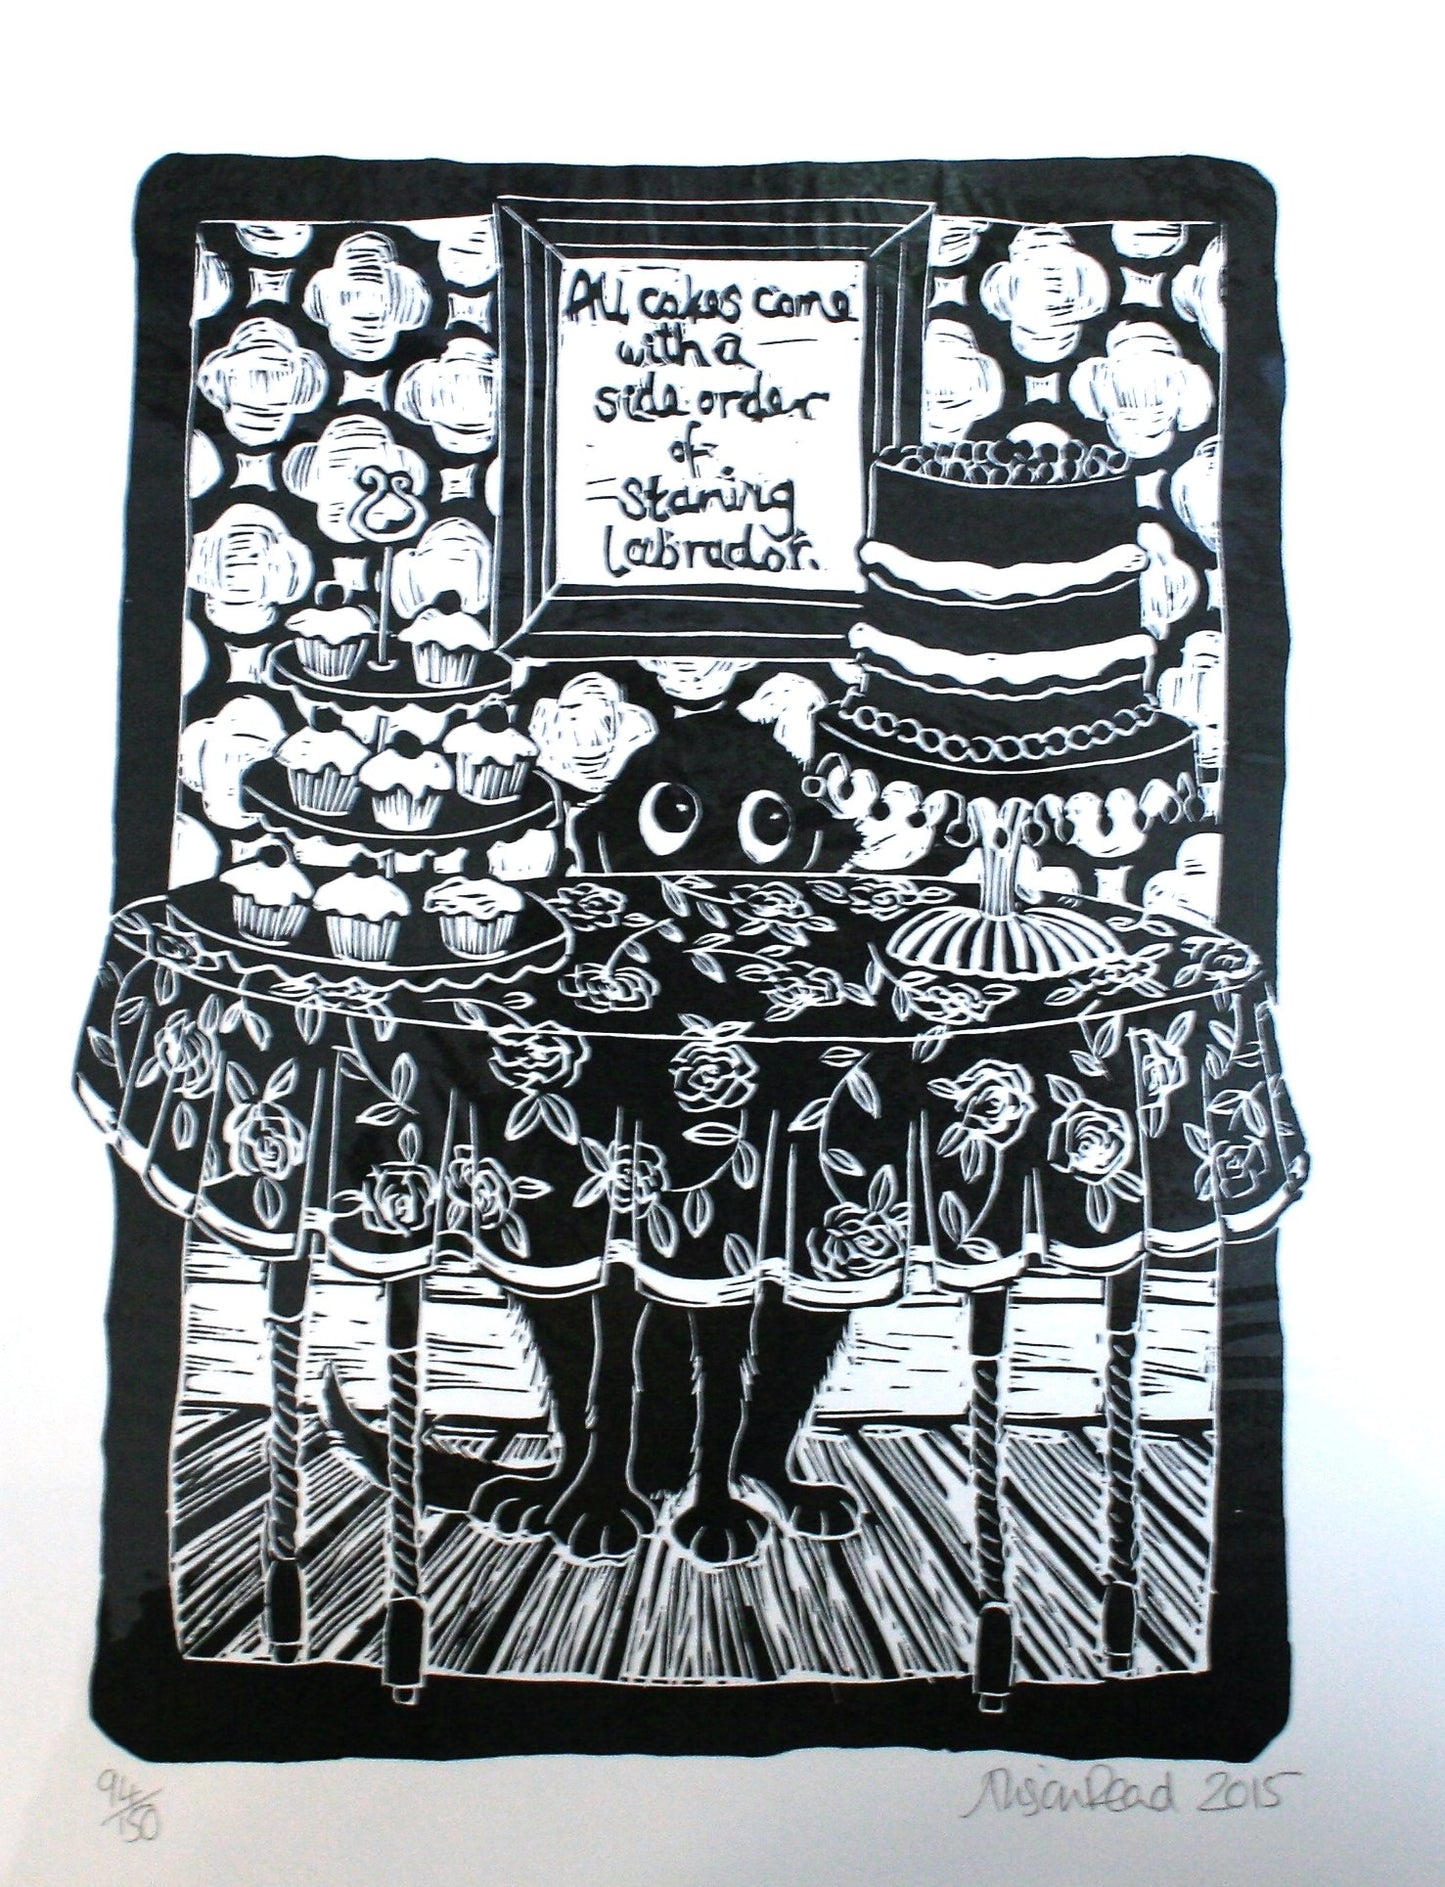 Alison Read -Black and White Etchings-  All Cakes Come With a Side Order of Starving Labrador